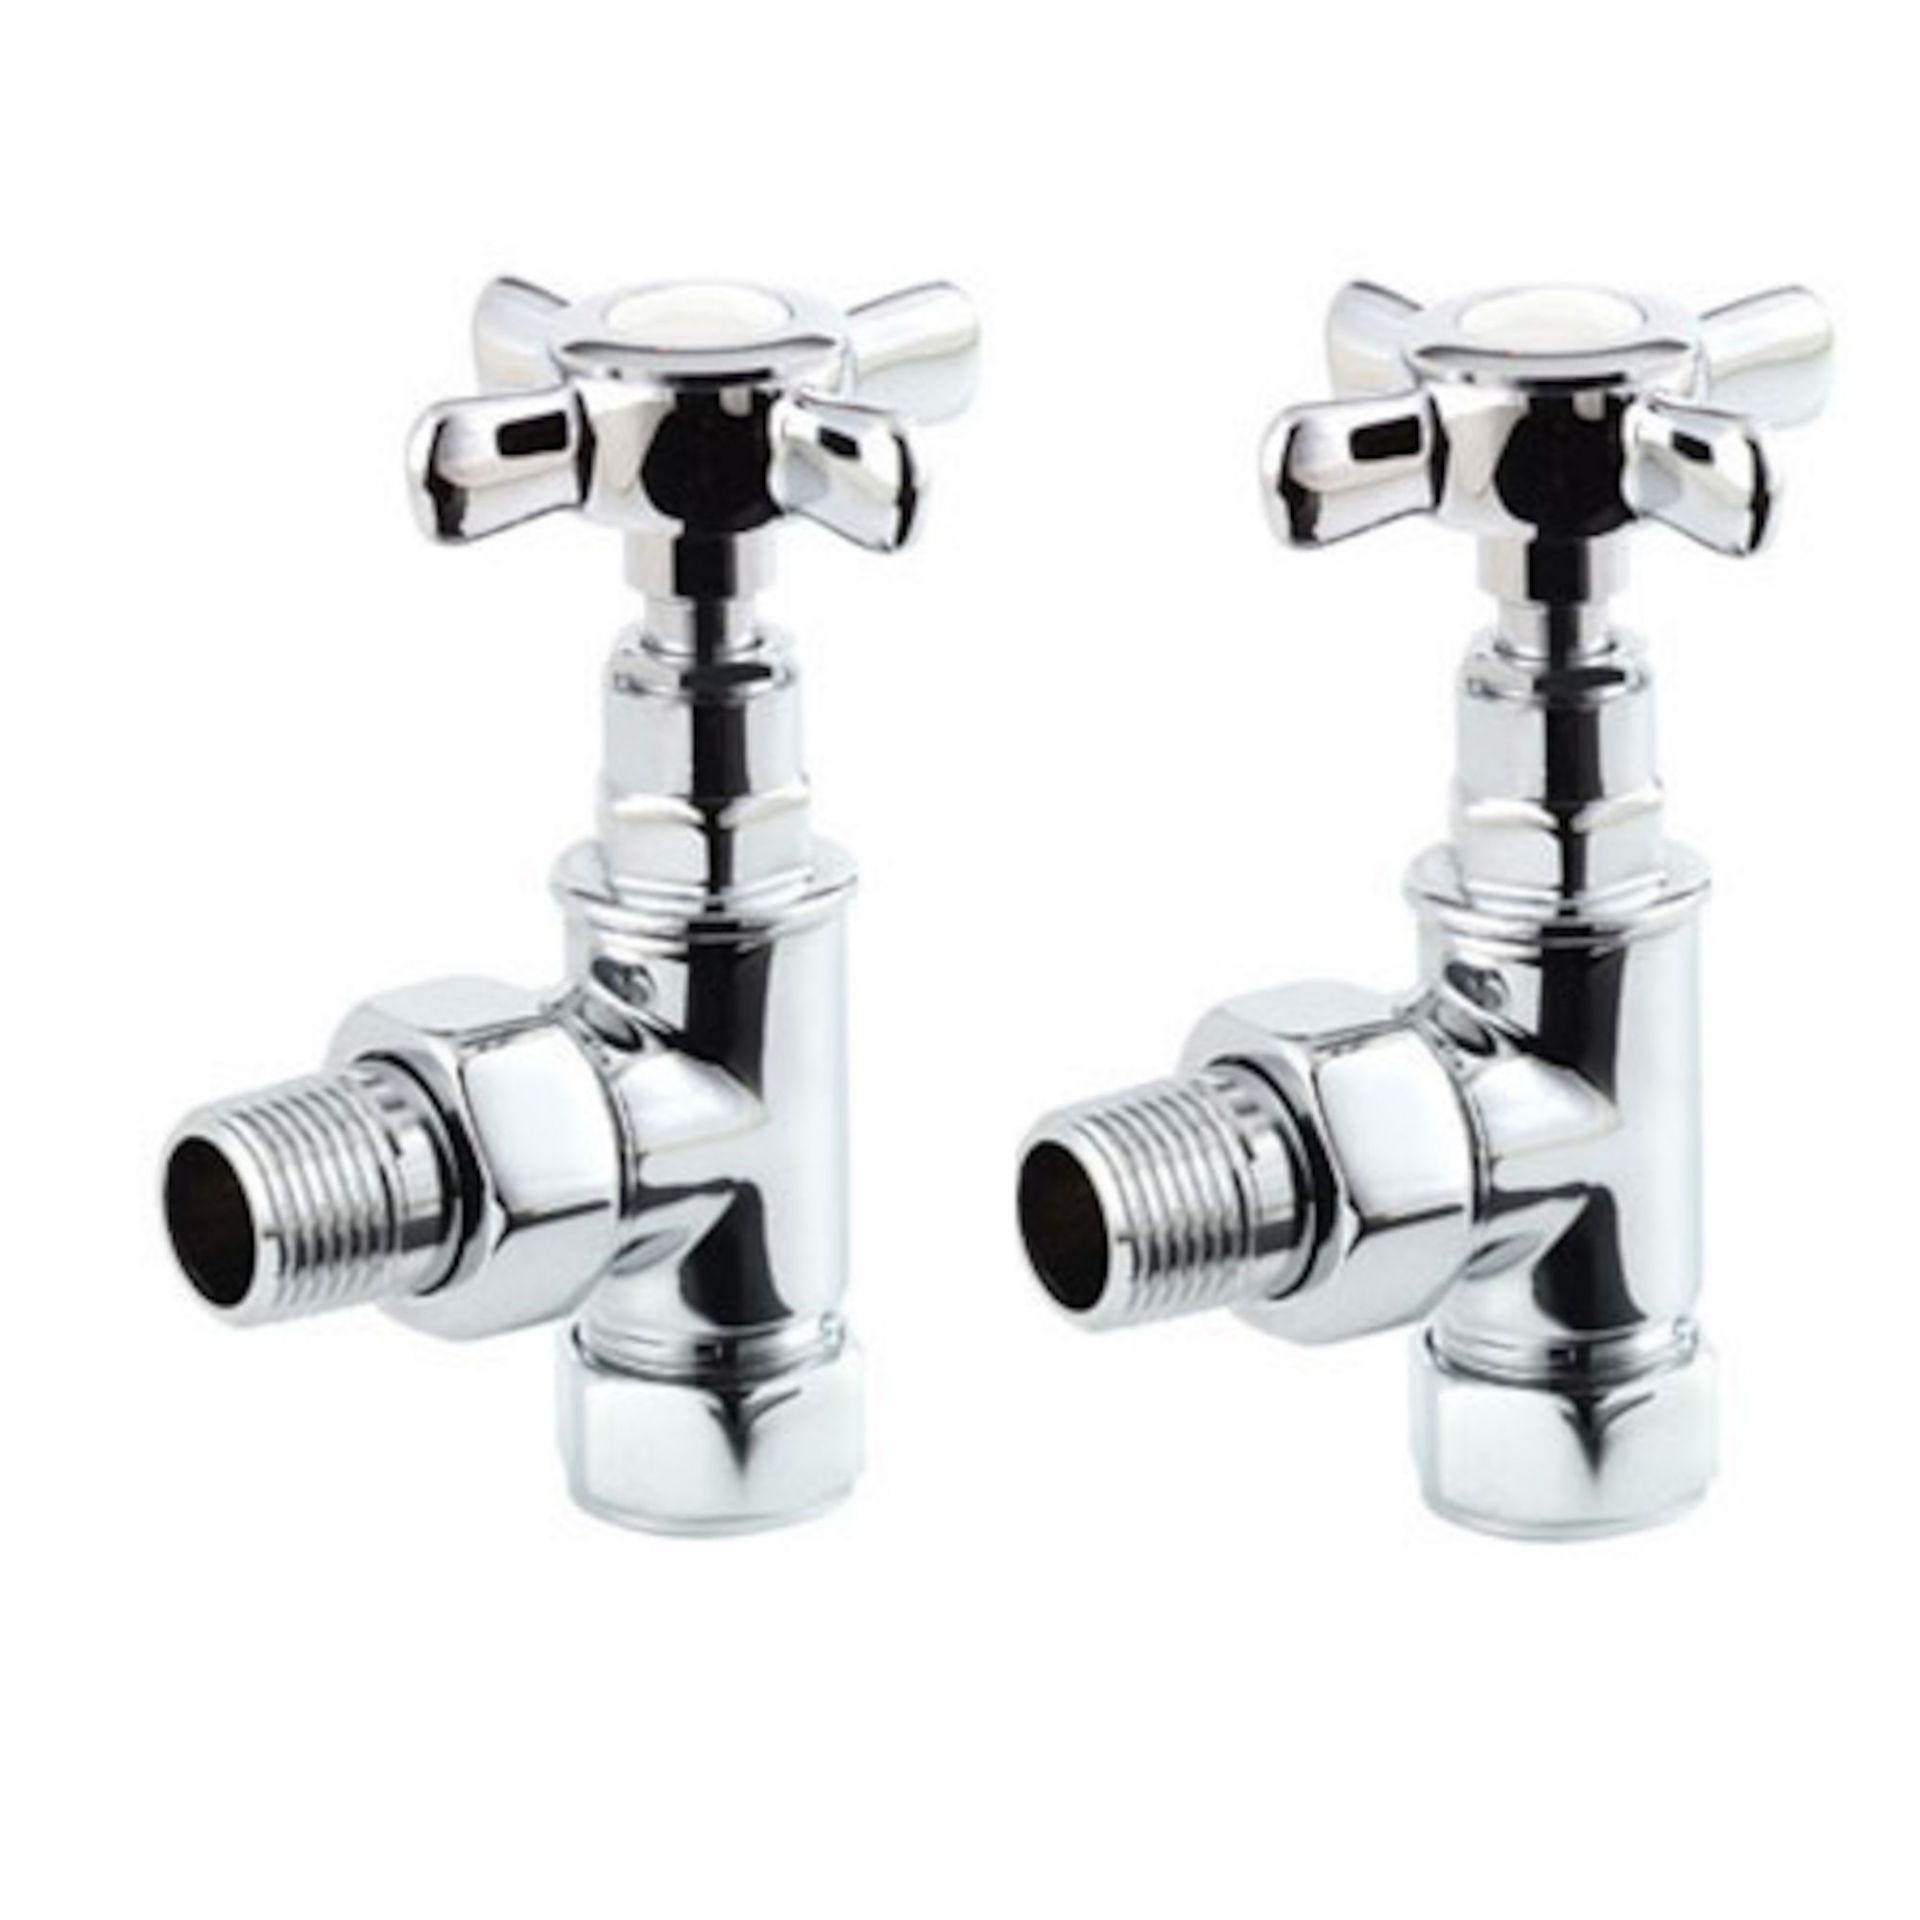 (XM54) 15mm Standard Connection Angled Polished Chrome Radiator Valves Chrome Plated Solid Brass